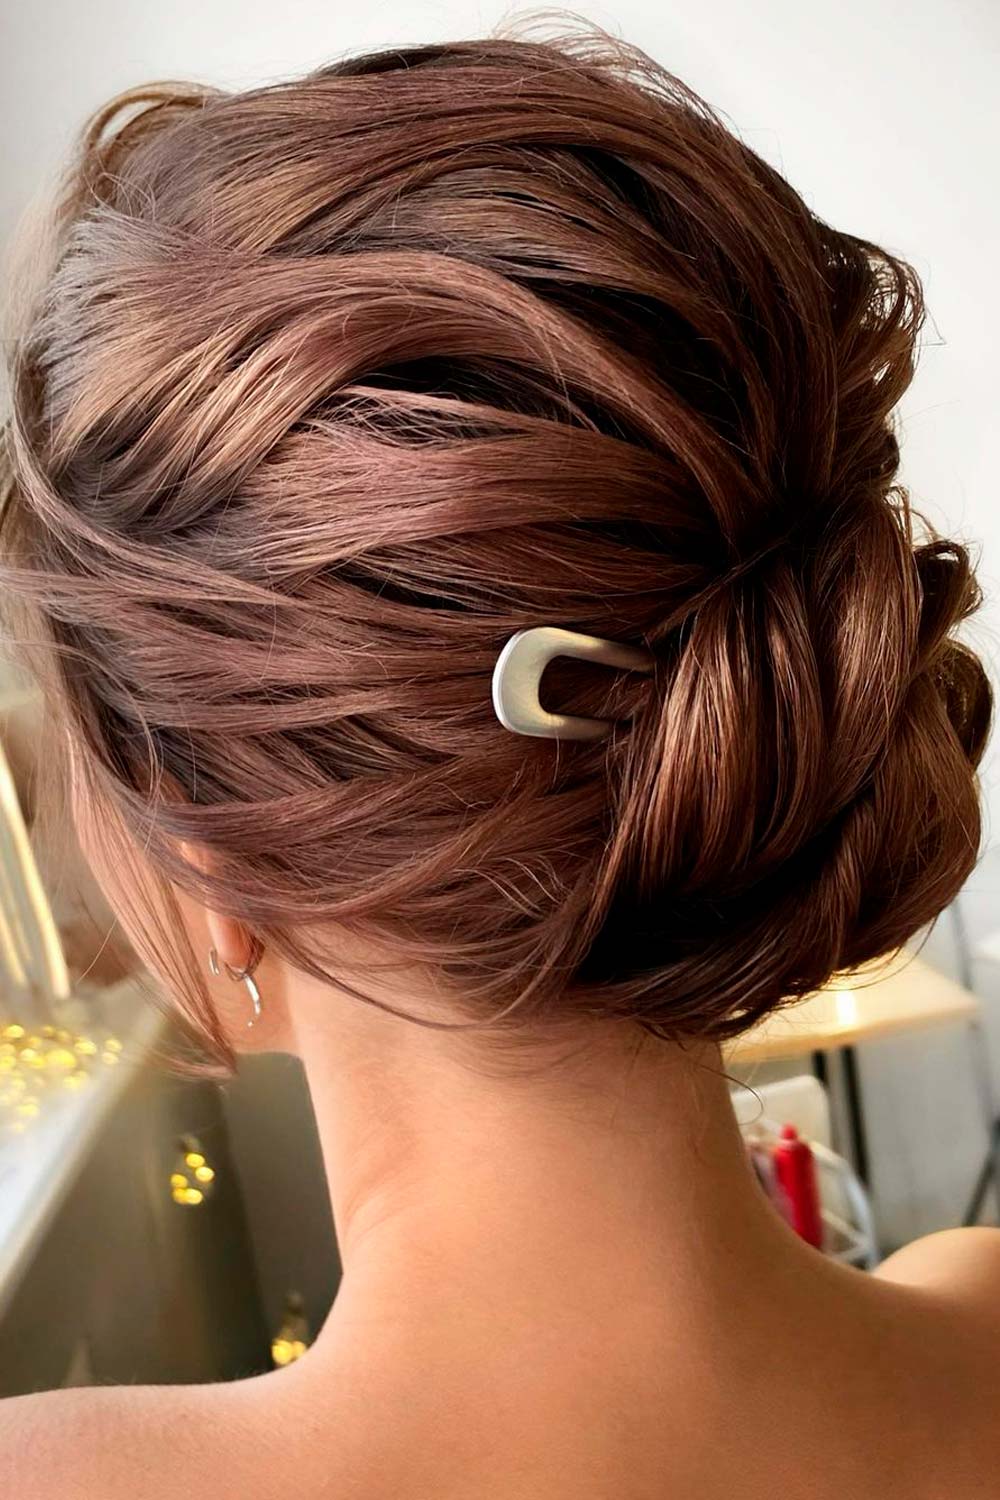 A loose updo with some accessory is a classic choice